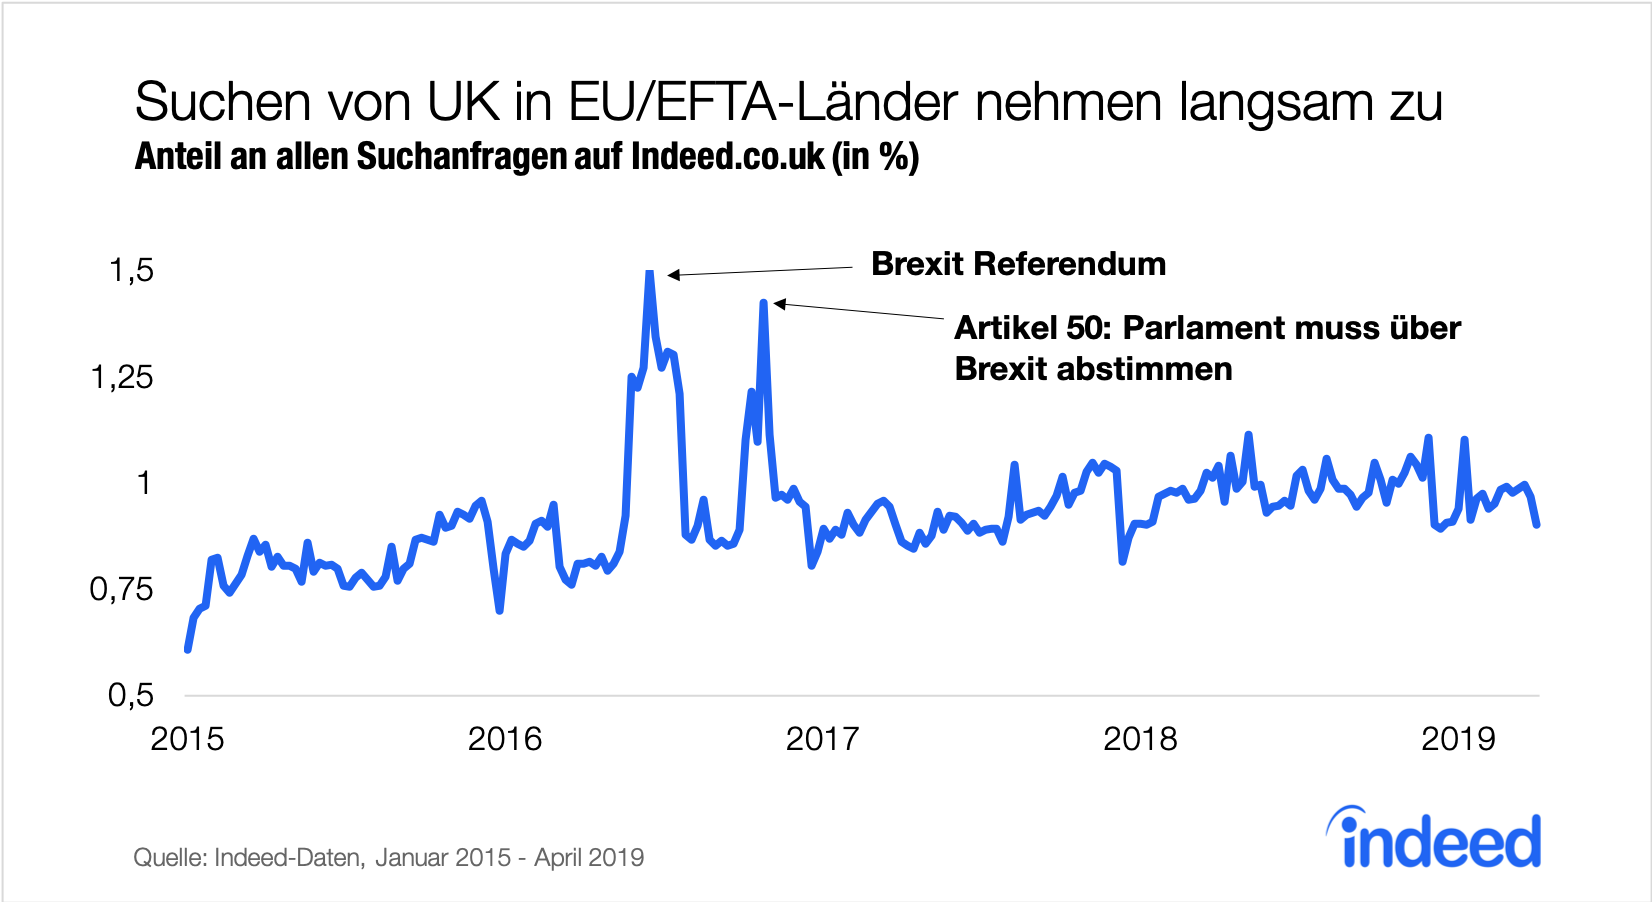 Search queries from the UK to EU / EFTA countries are slowly increasing